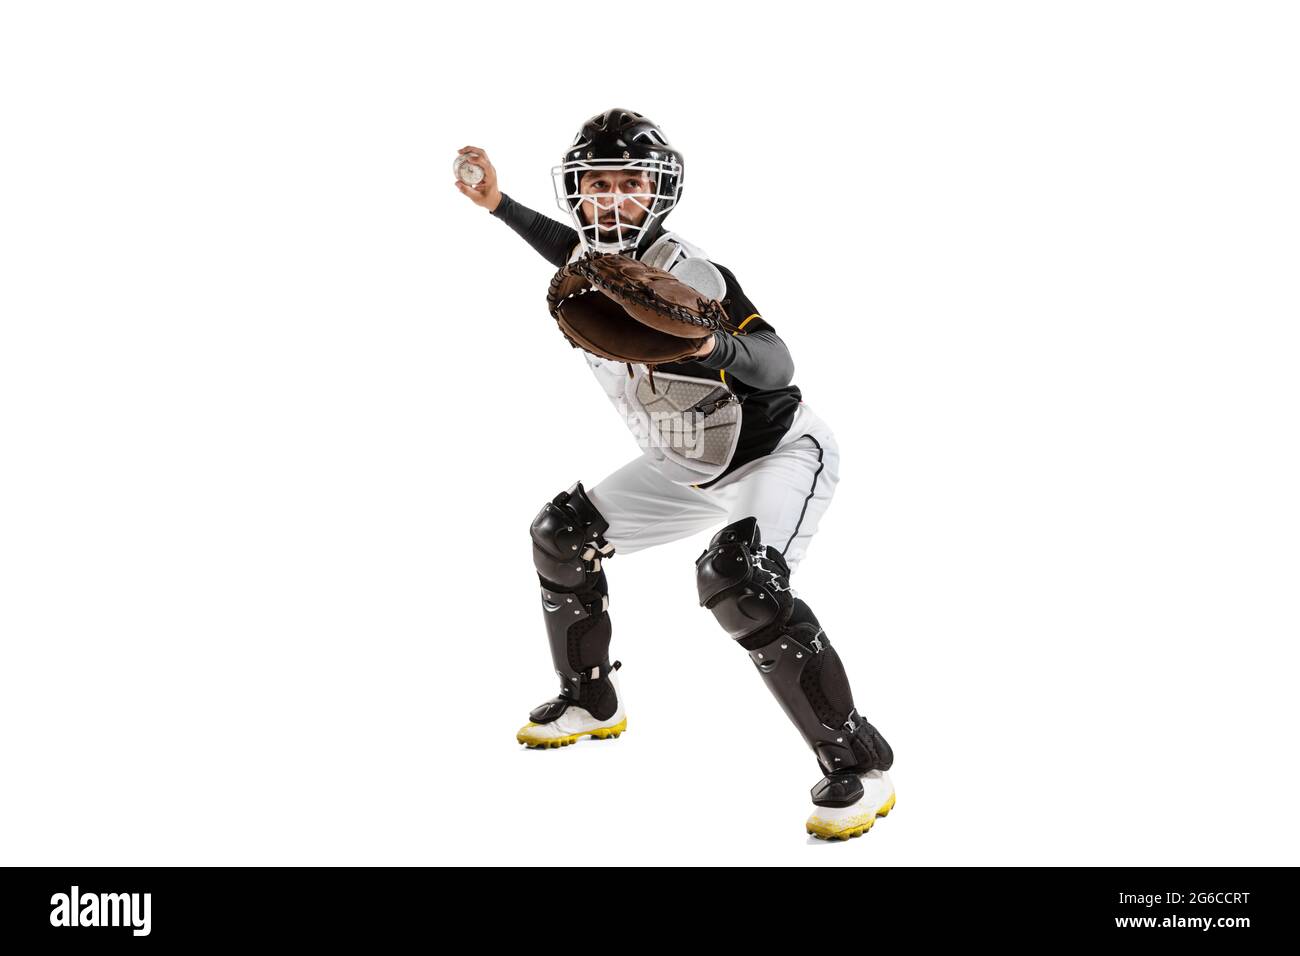 Baseball player, catcher in action in white sports uniform and equipment practicing isolated on a white studio background. Side view Stock Photo